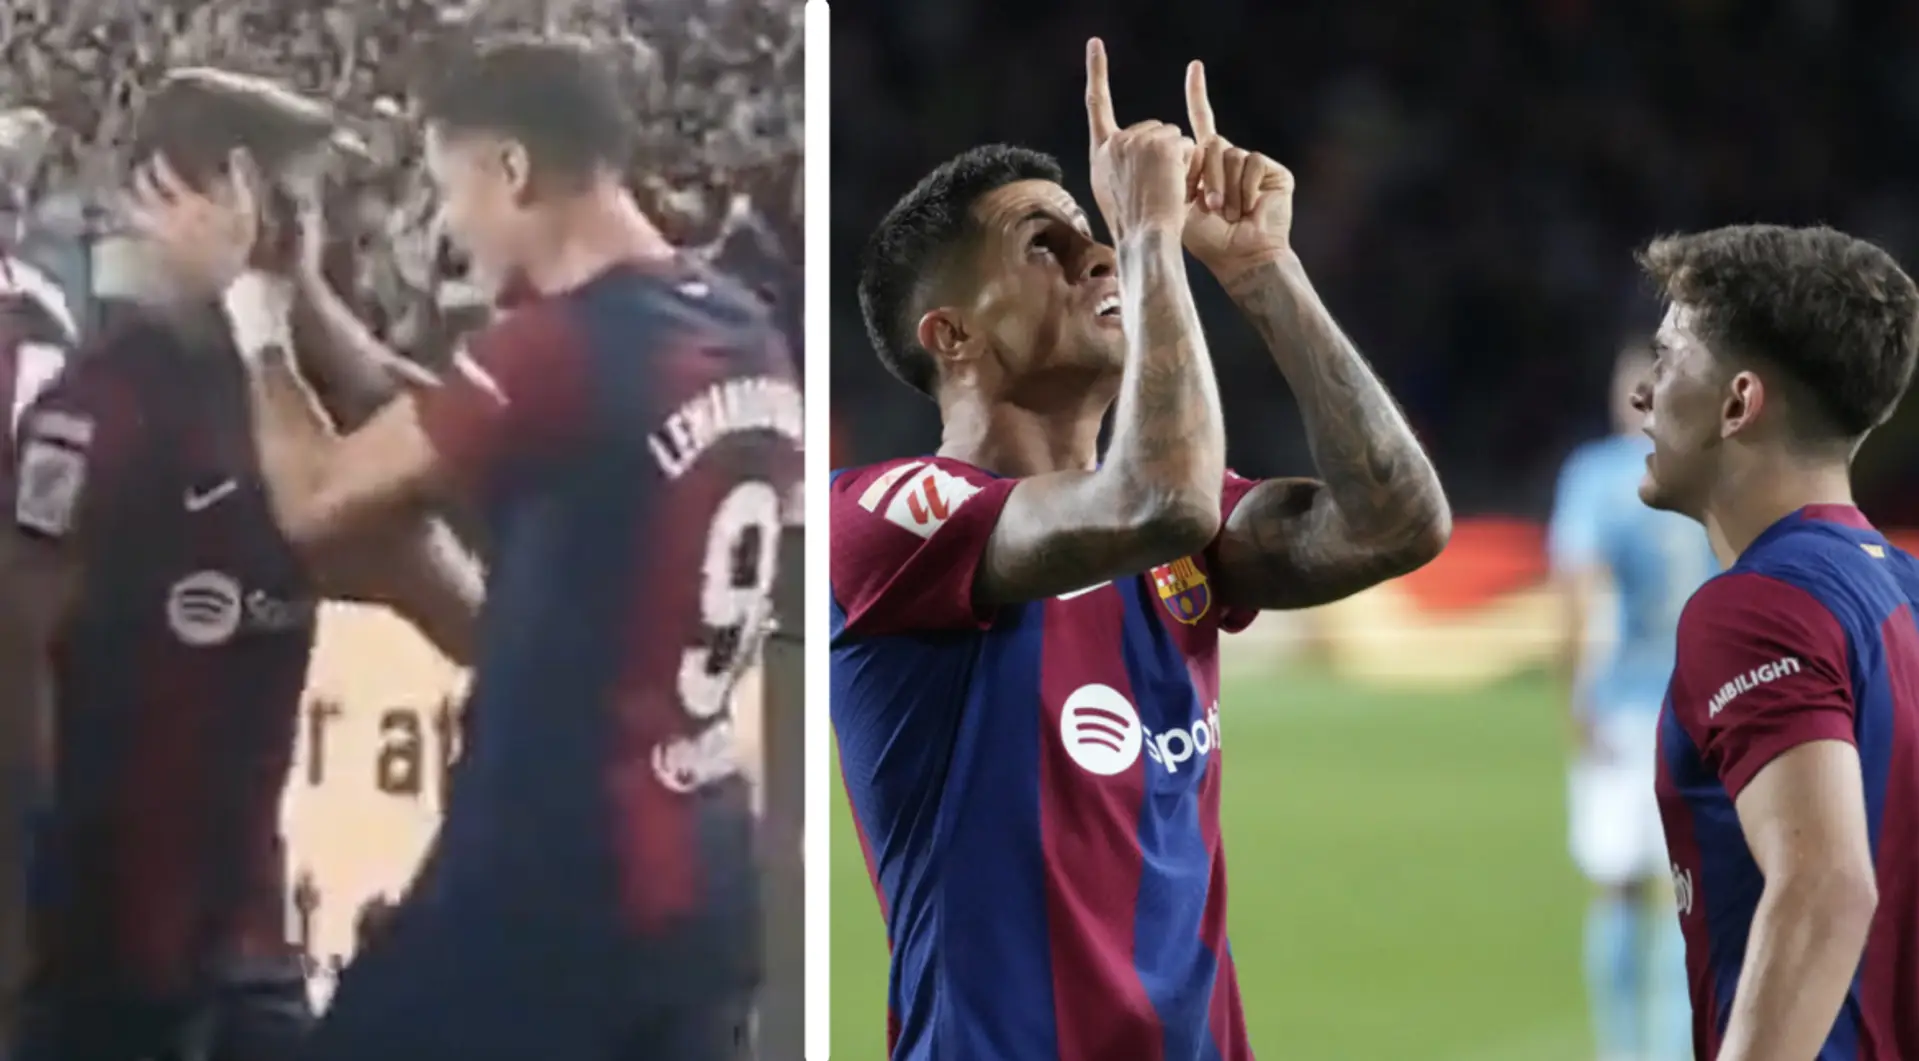 Pats Cancelo, interrupts his touching celebration: Gavi's actions at 3-2 v Celta spotted